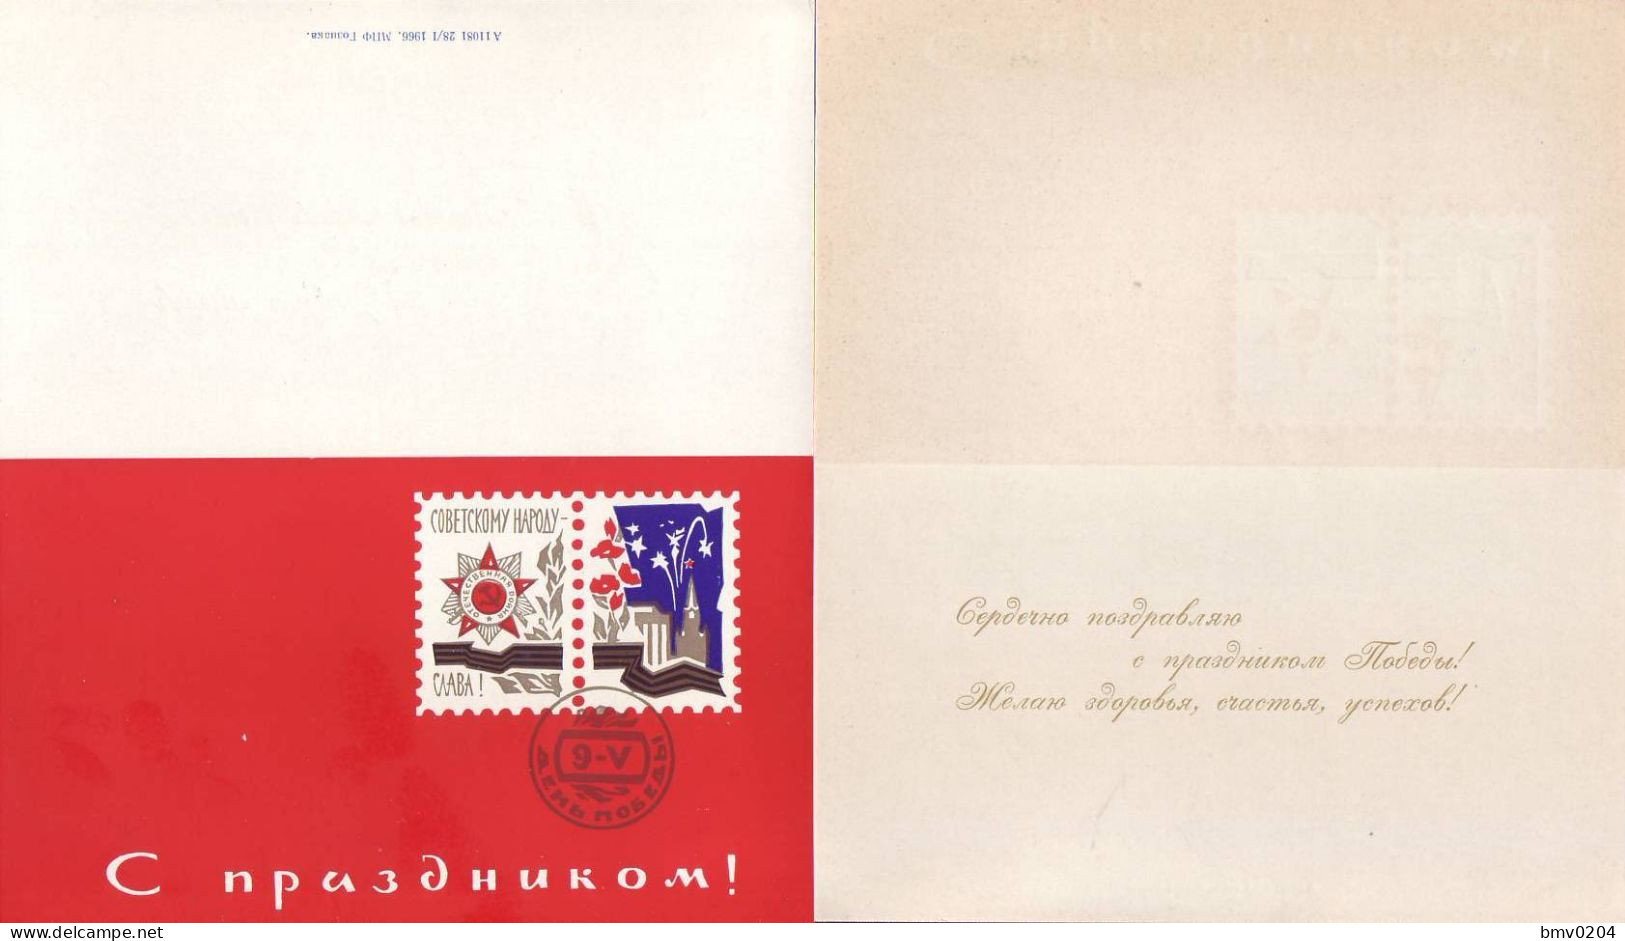 1966 RUSSIA RUSSIE USSR URSS  May 9 - Victory Day! Order, Victory Salute  Souvenir Postcard - Covers & Documents